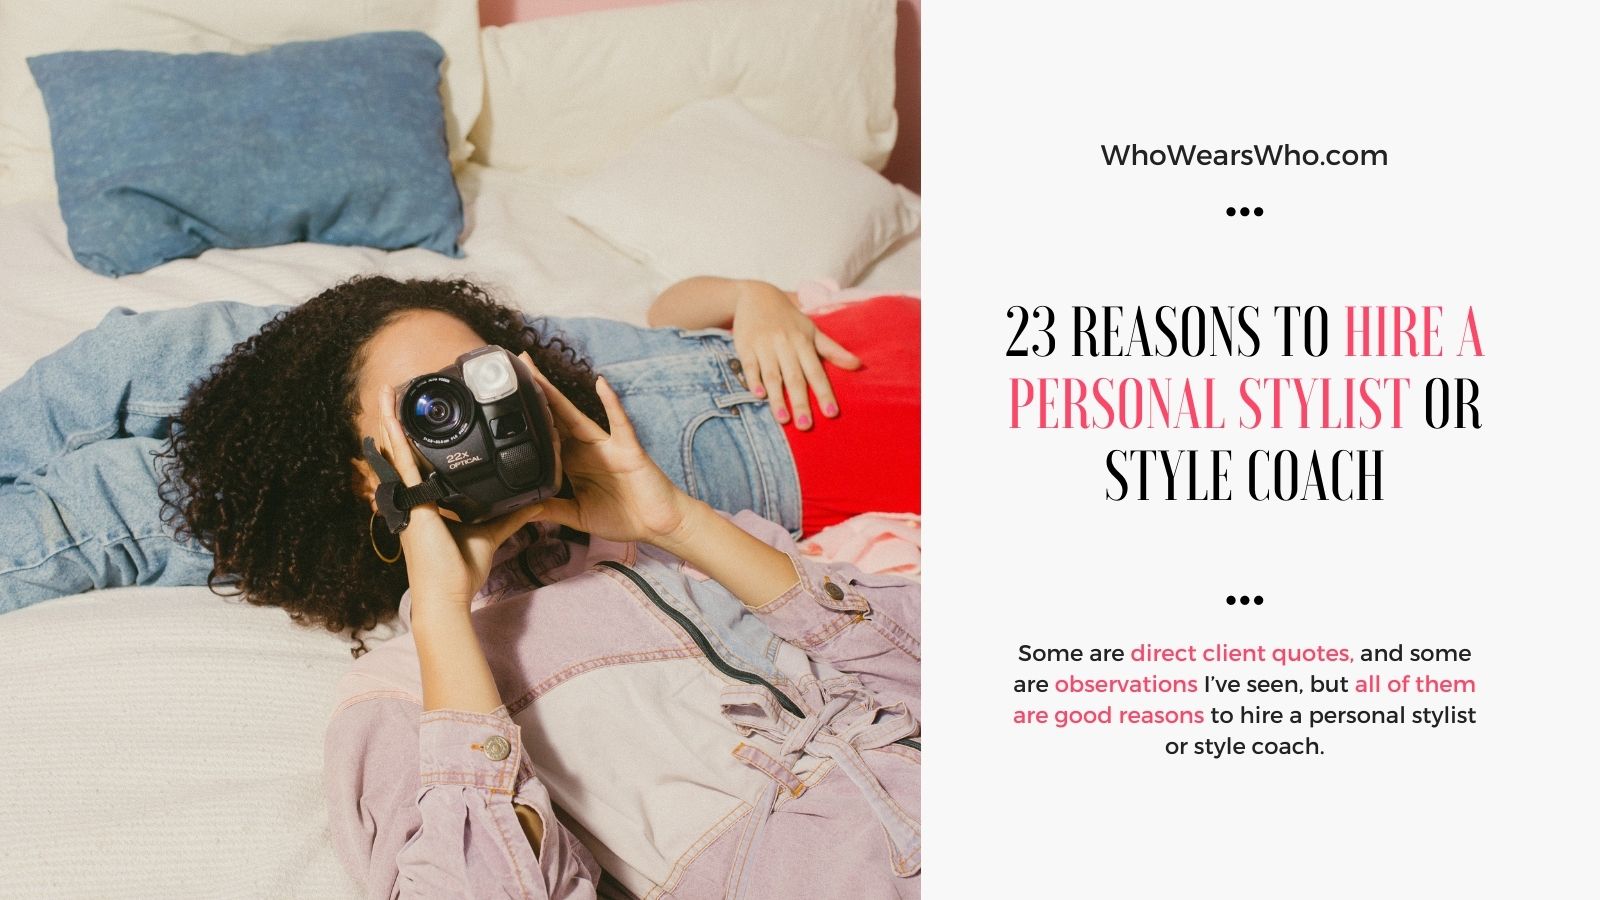 23 Reasons to Hire a Personal Stylist or Style Coach Twitter